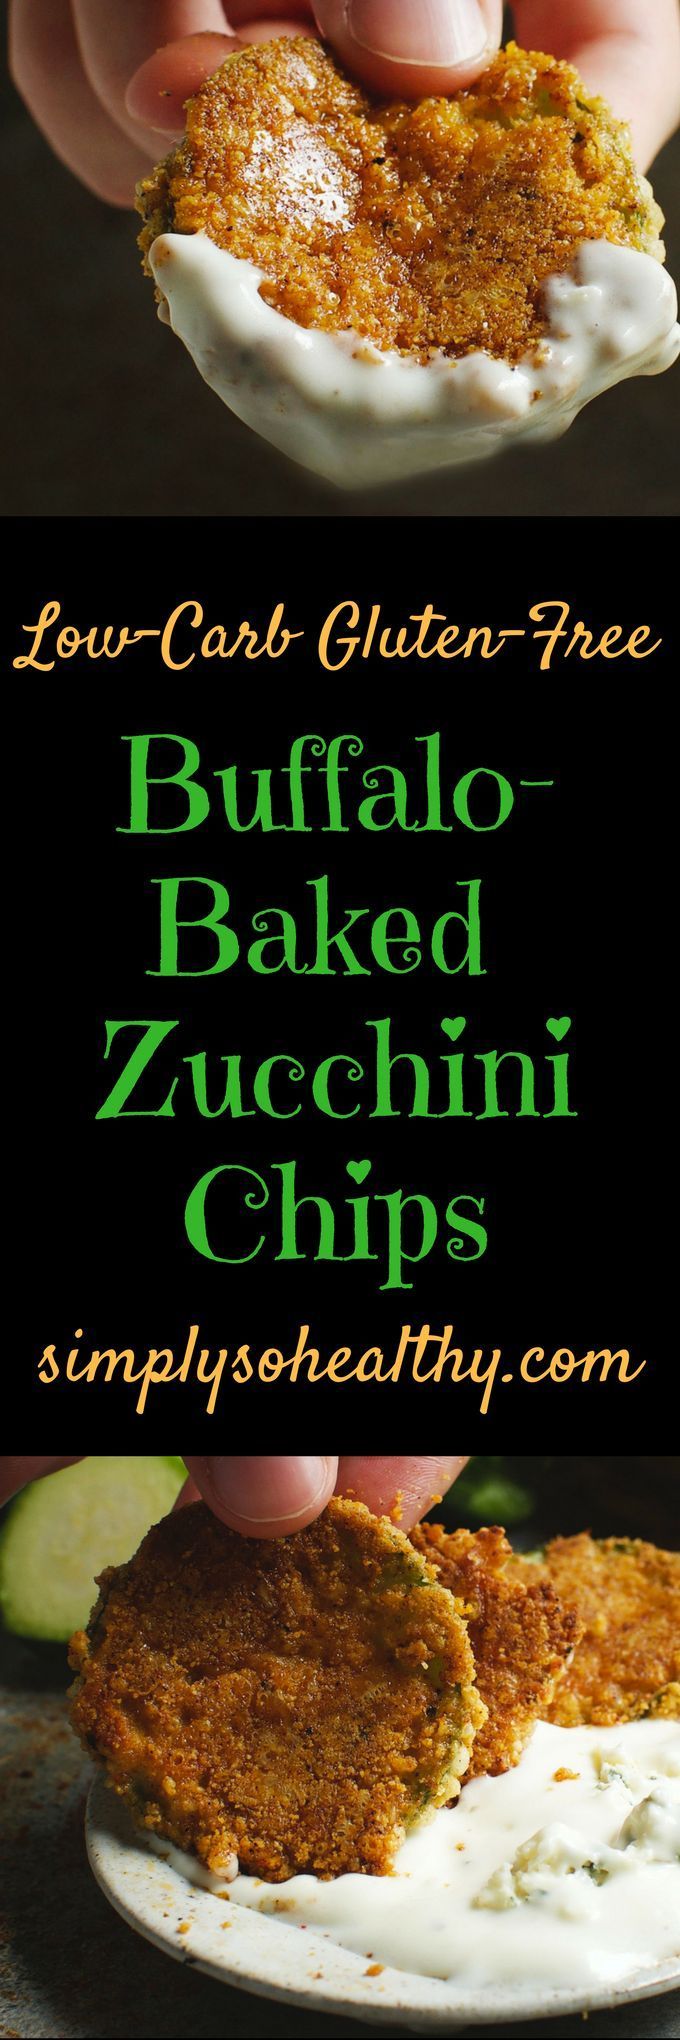 These Low-Carb Buffalo Baked Zucchini Chips make a delicious snack or side dish. They can be part of a low-carb, ketogenic,